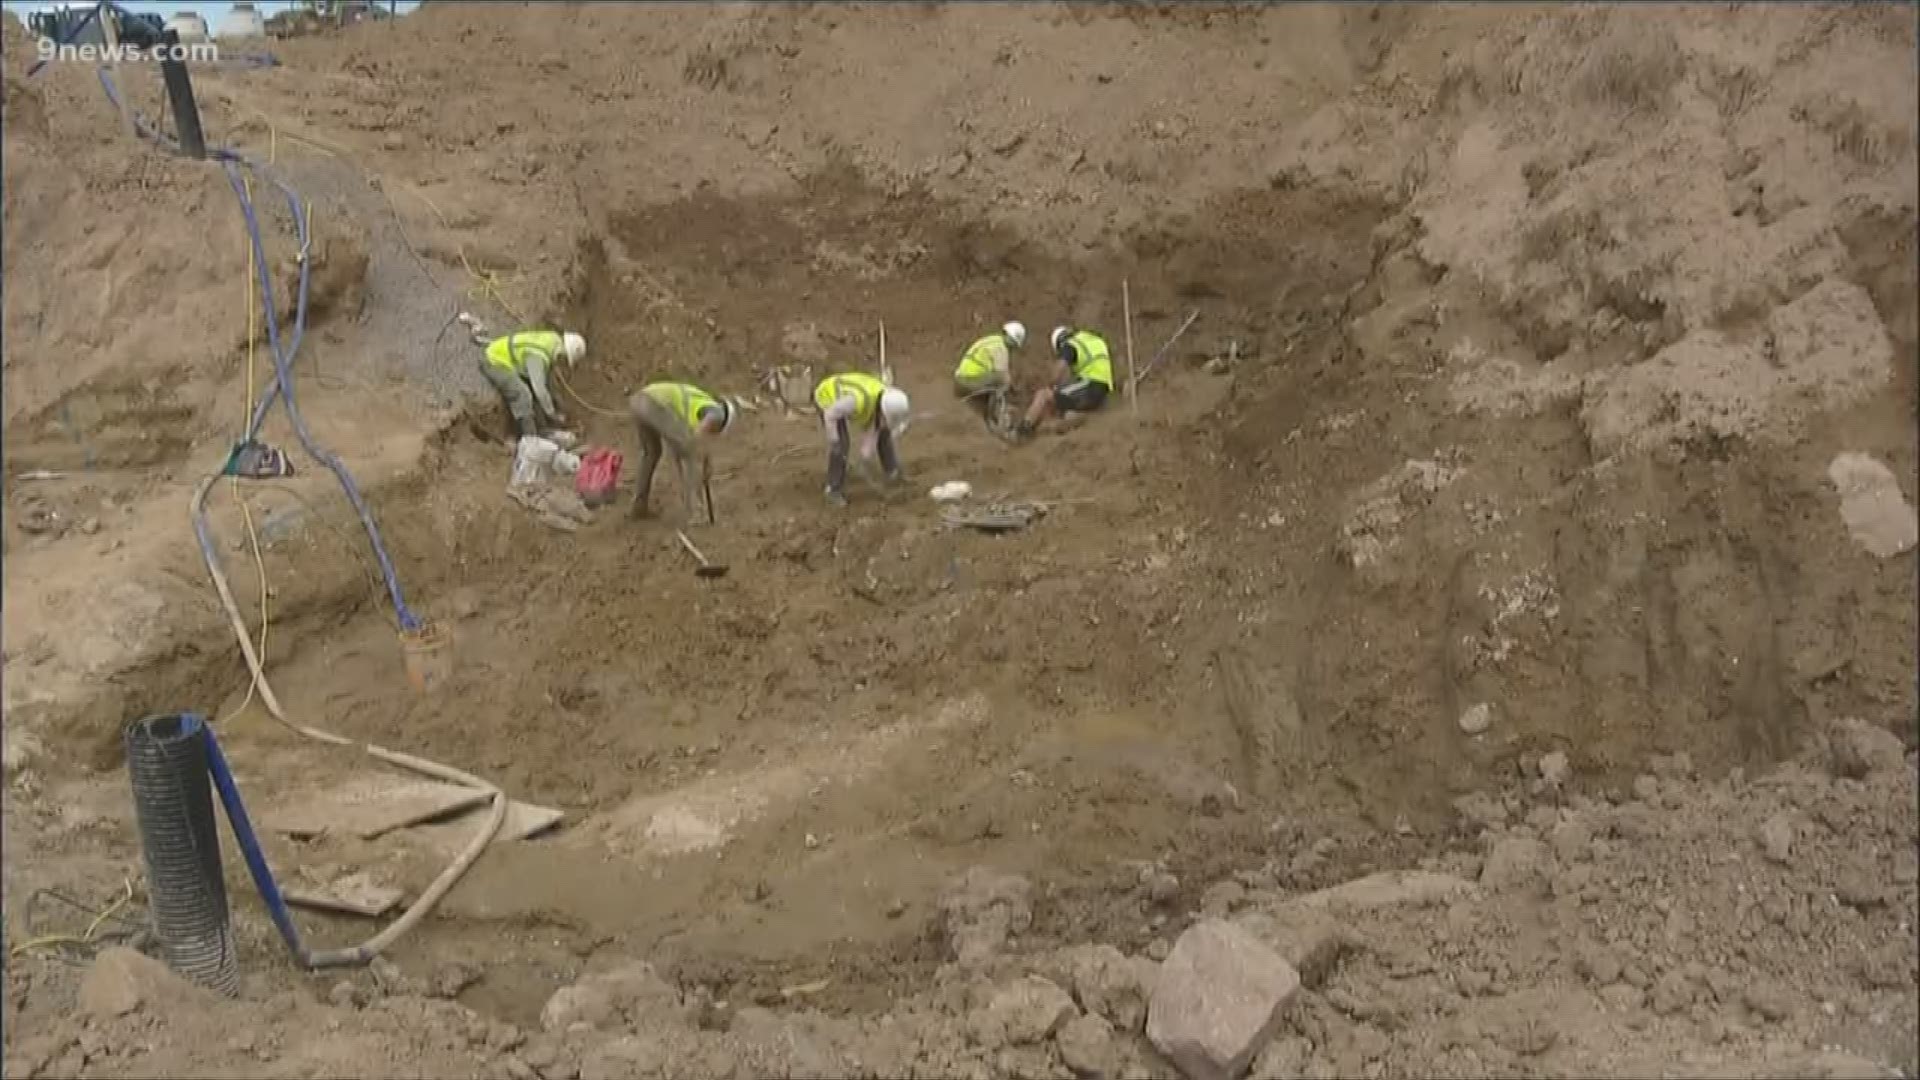 A partial rib and several other bones were discovered and join those already unearthed by the Denver Museum of Nature & Science dig team.